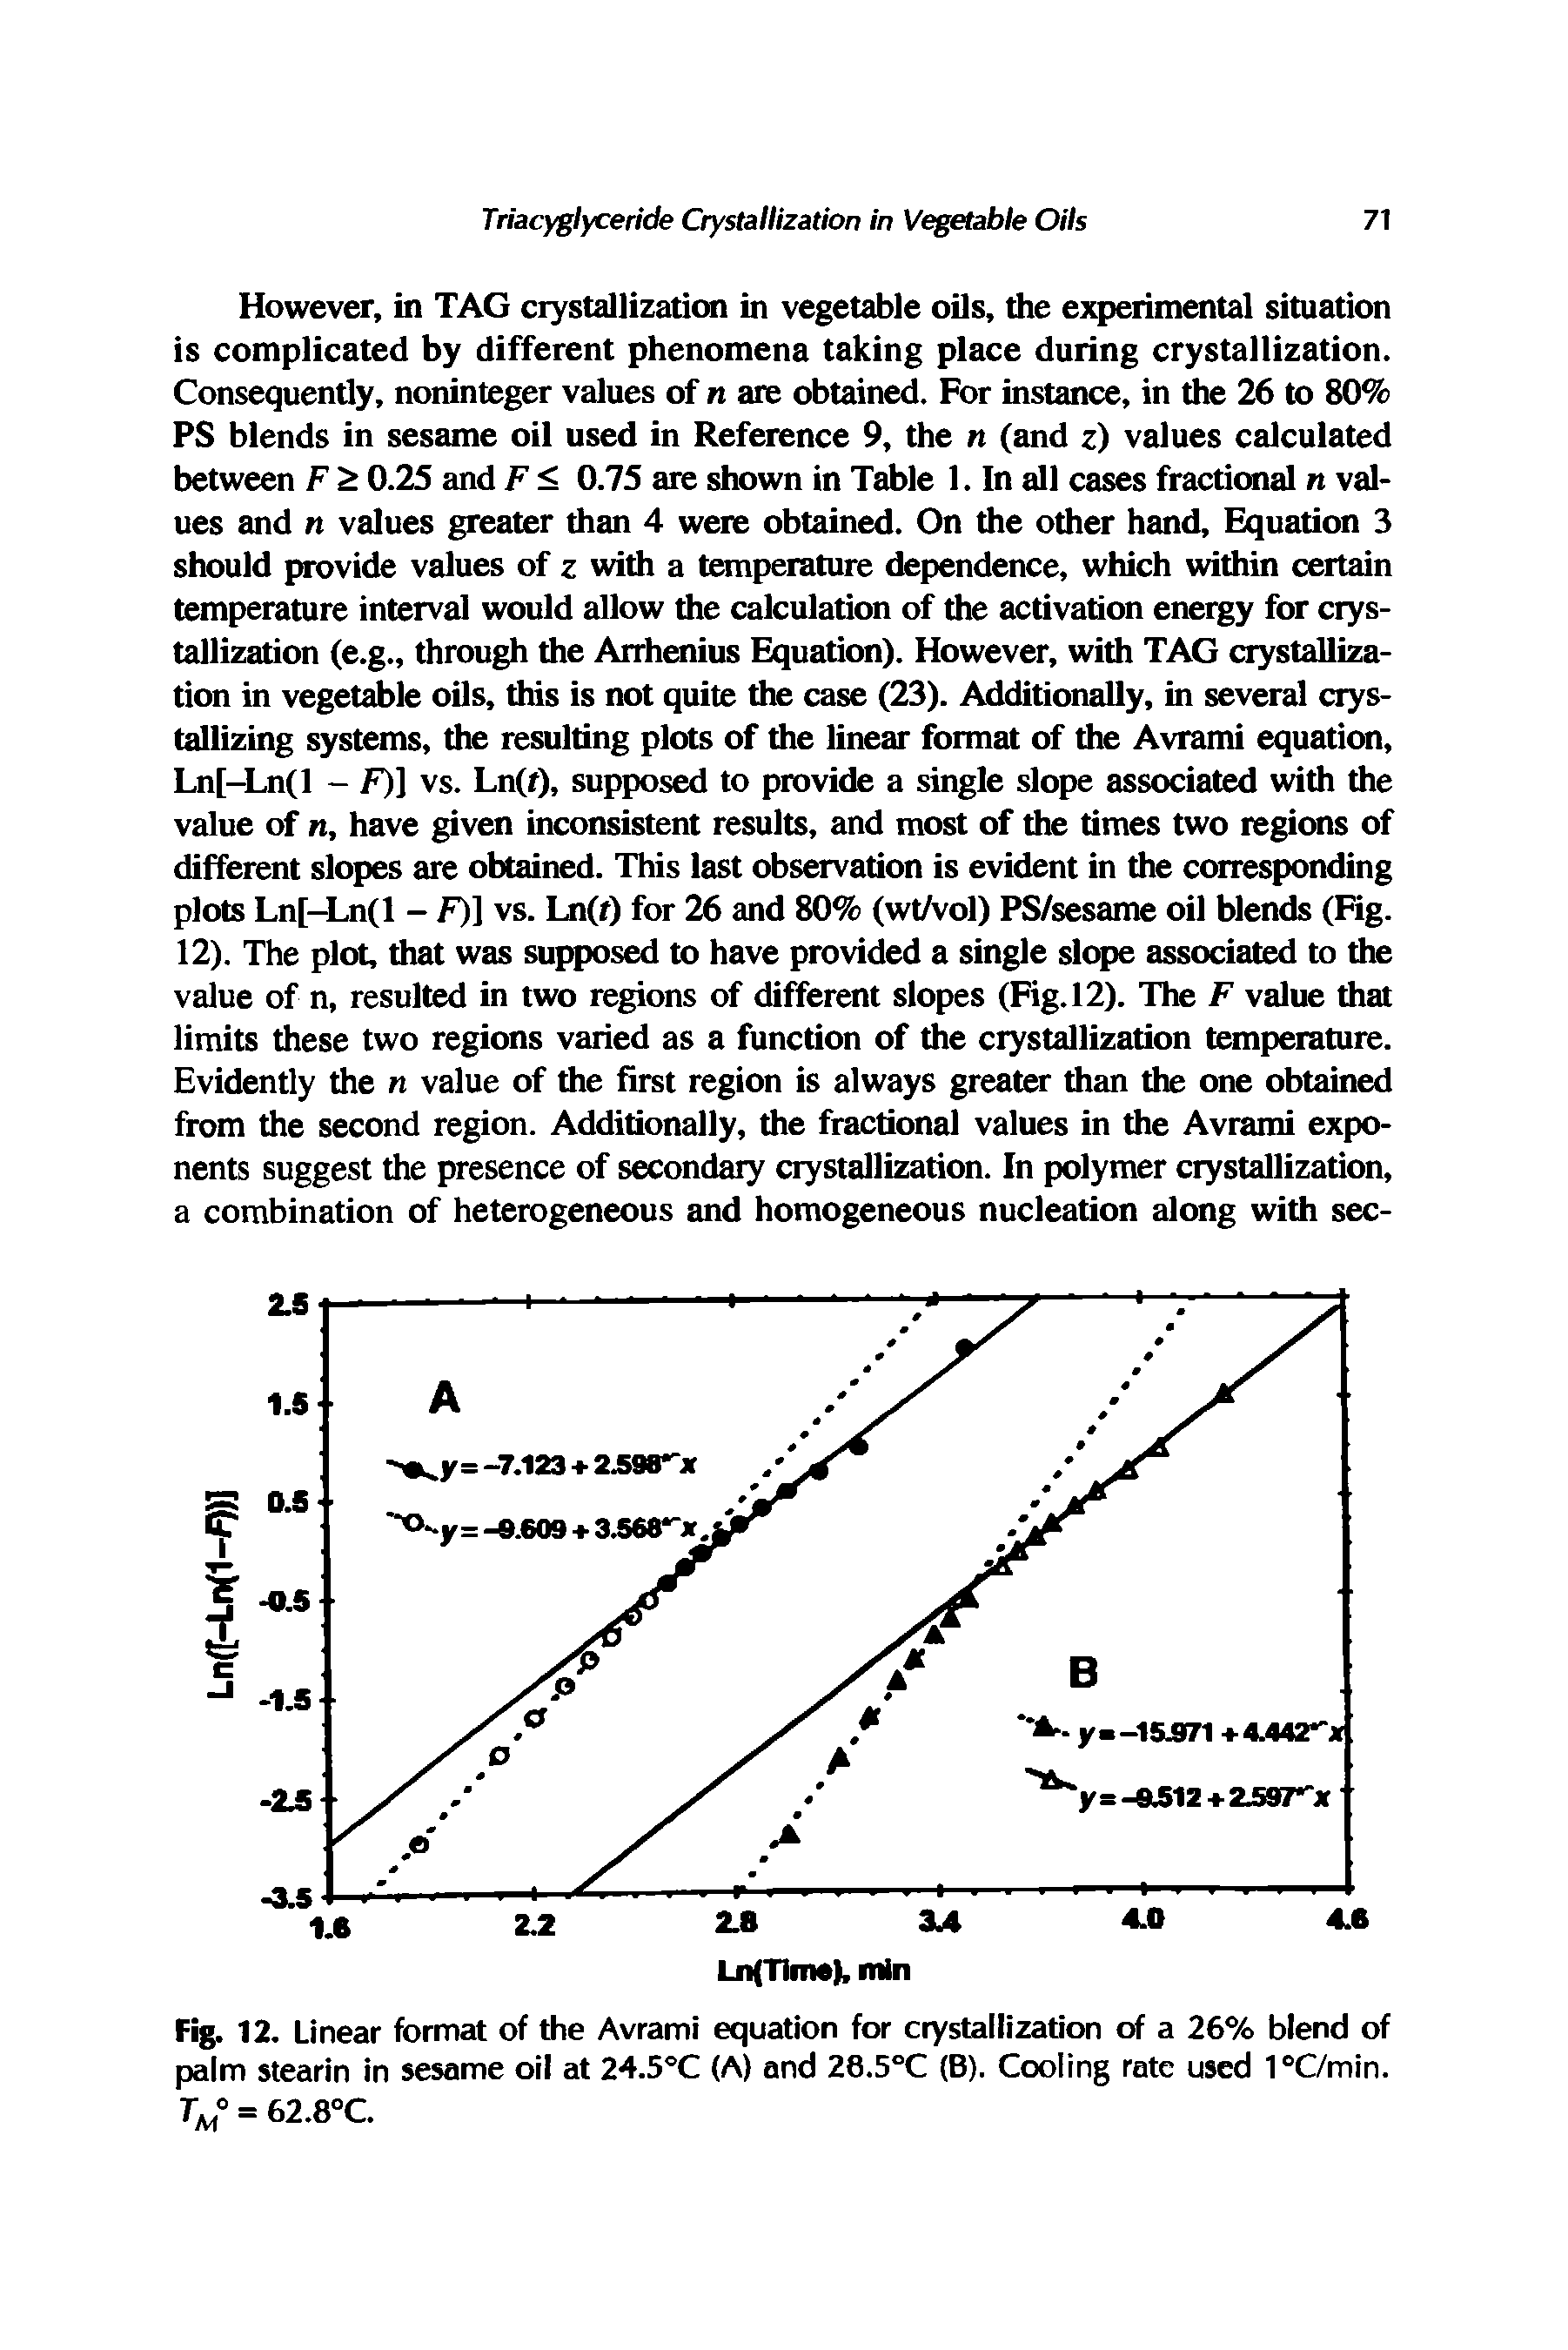 Fig. 12. Linear format of the Avrami equation for crystallization of a 26% blend of palm stearin in sesame oil at 24.5°C (A) and 26.5°C (B). Cooling rate used I C/min.